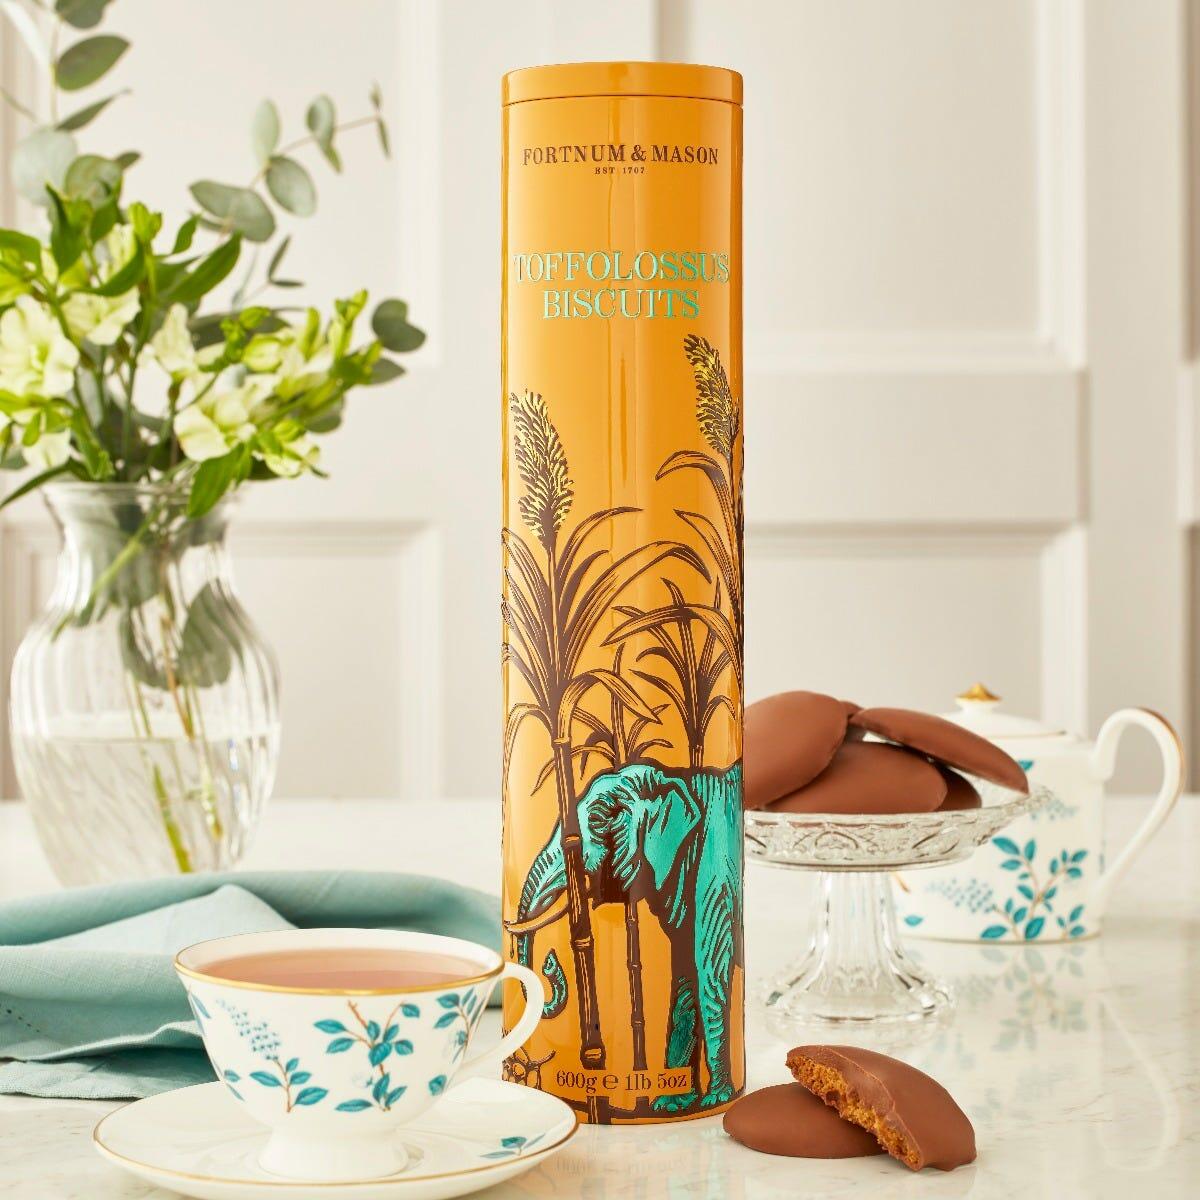 Fortnum & Mason Toffolossus Biscuits, 600G